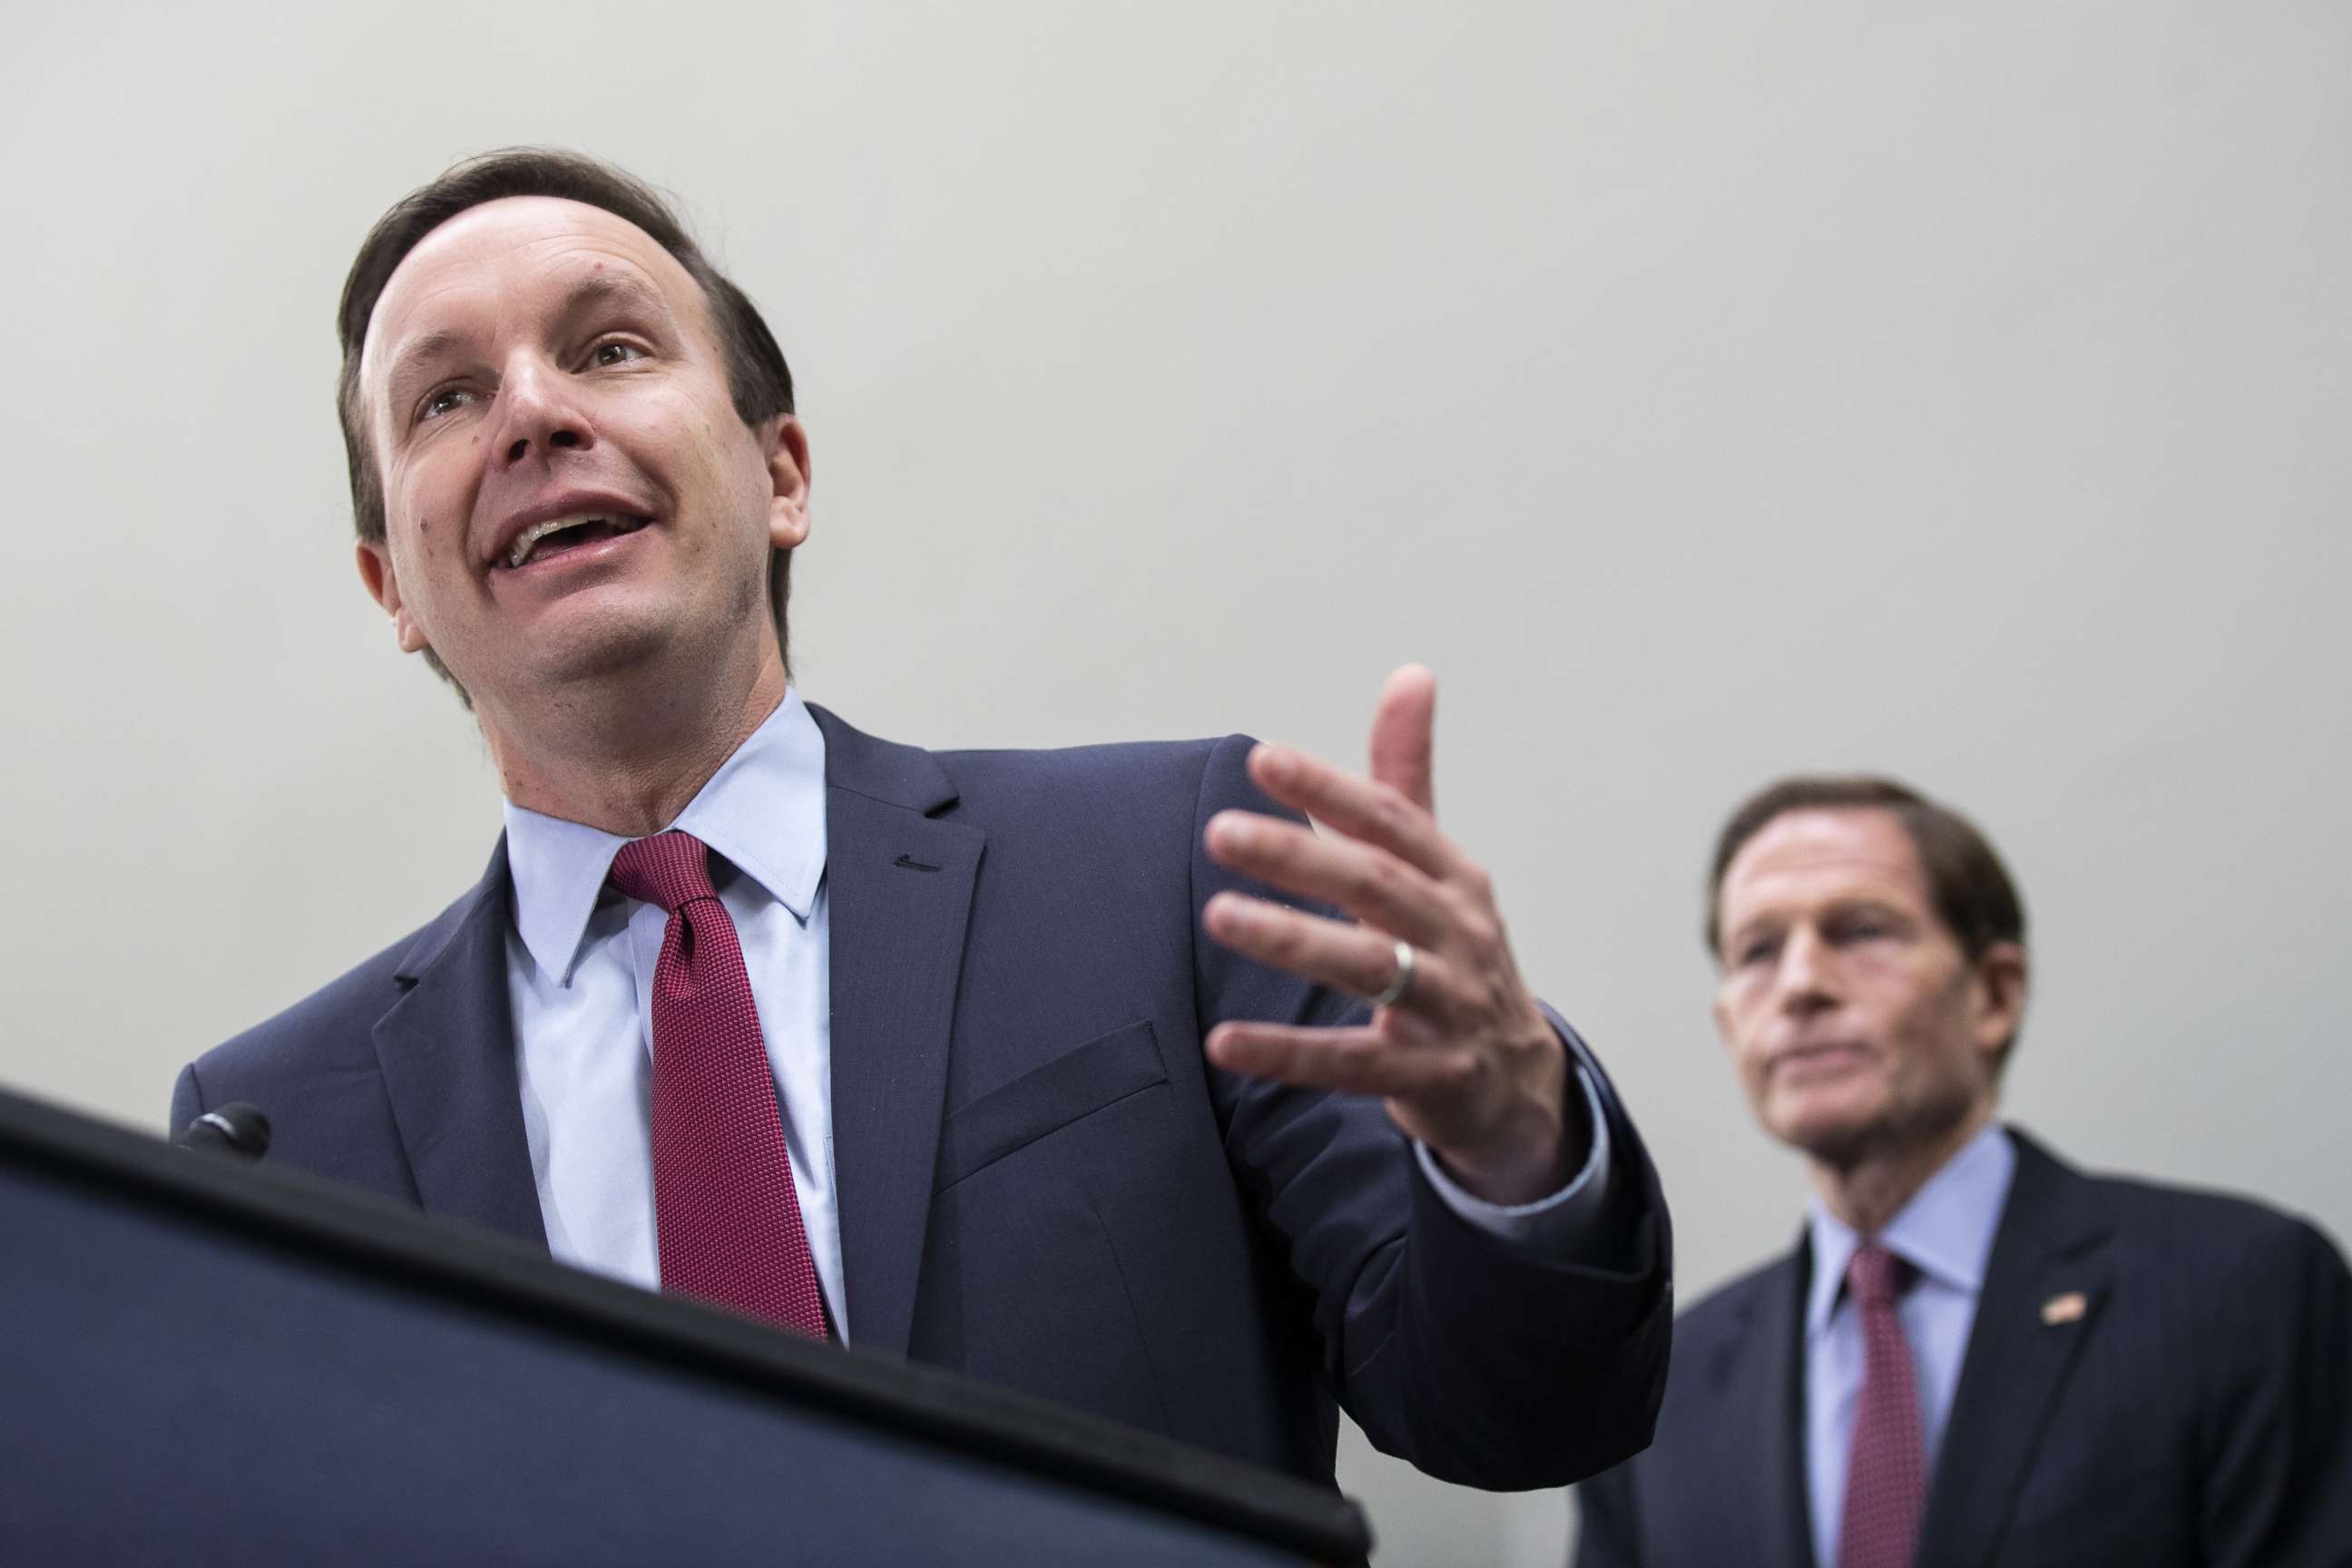 PHOTO: Sen. Chris Murphy (D-CT) speaks during a news conference to demand action for gun violence prevention, Dec. 6, 2018, in Washington, D.C.